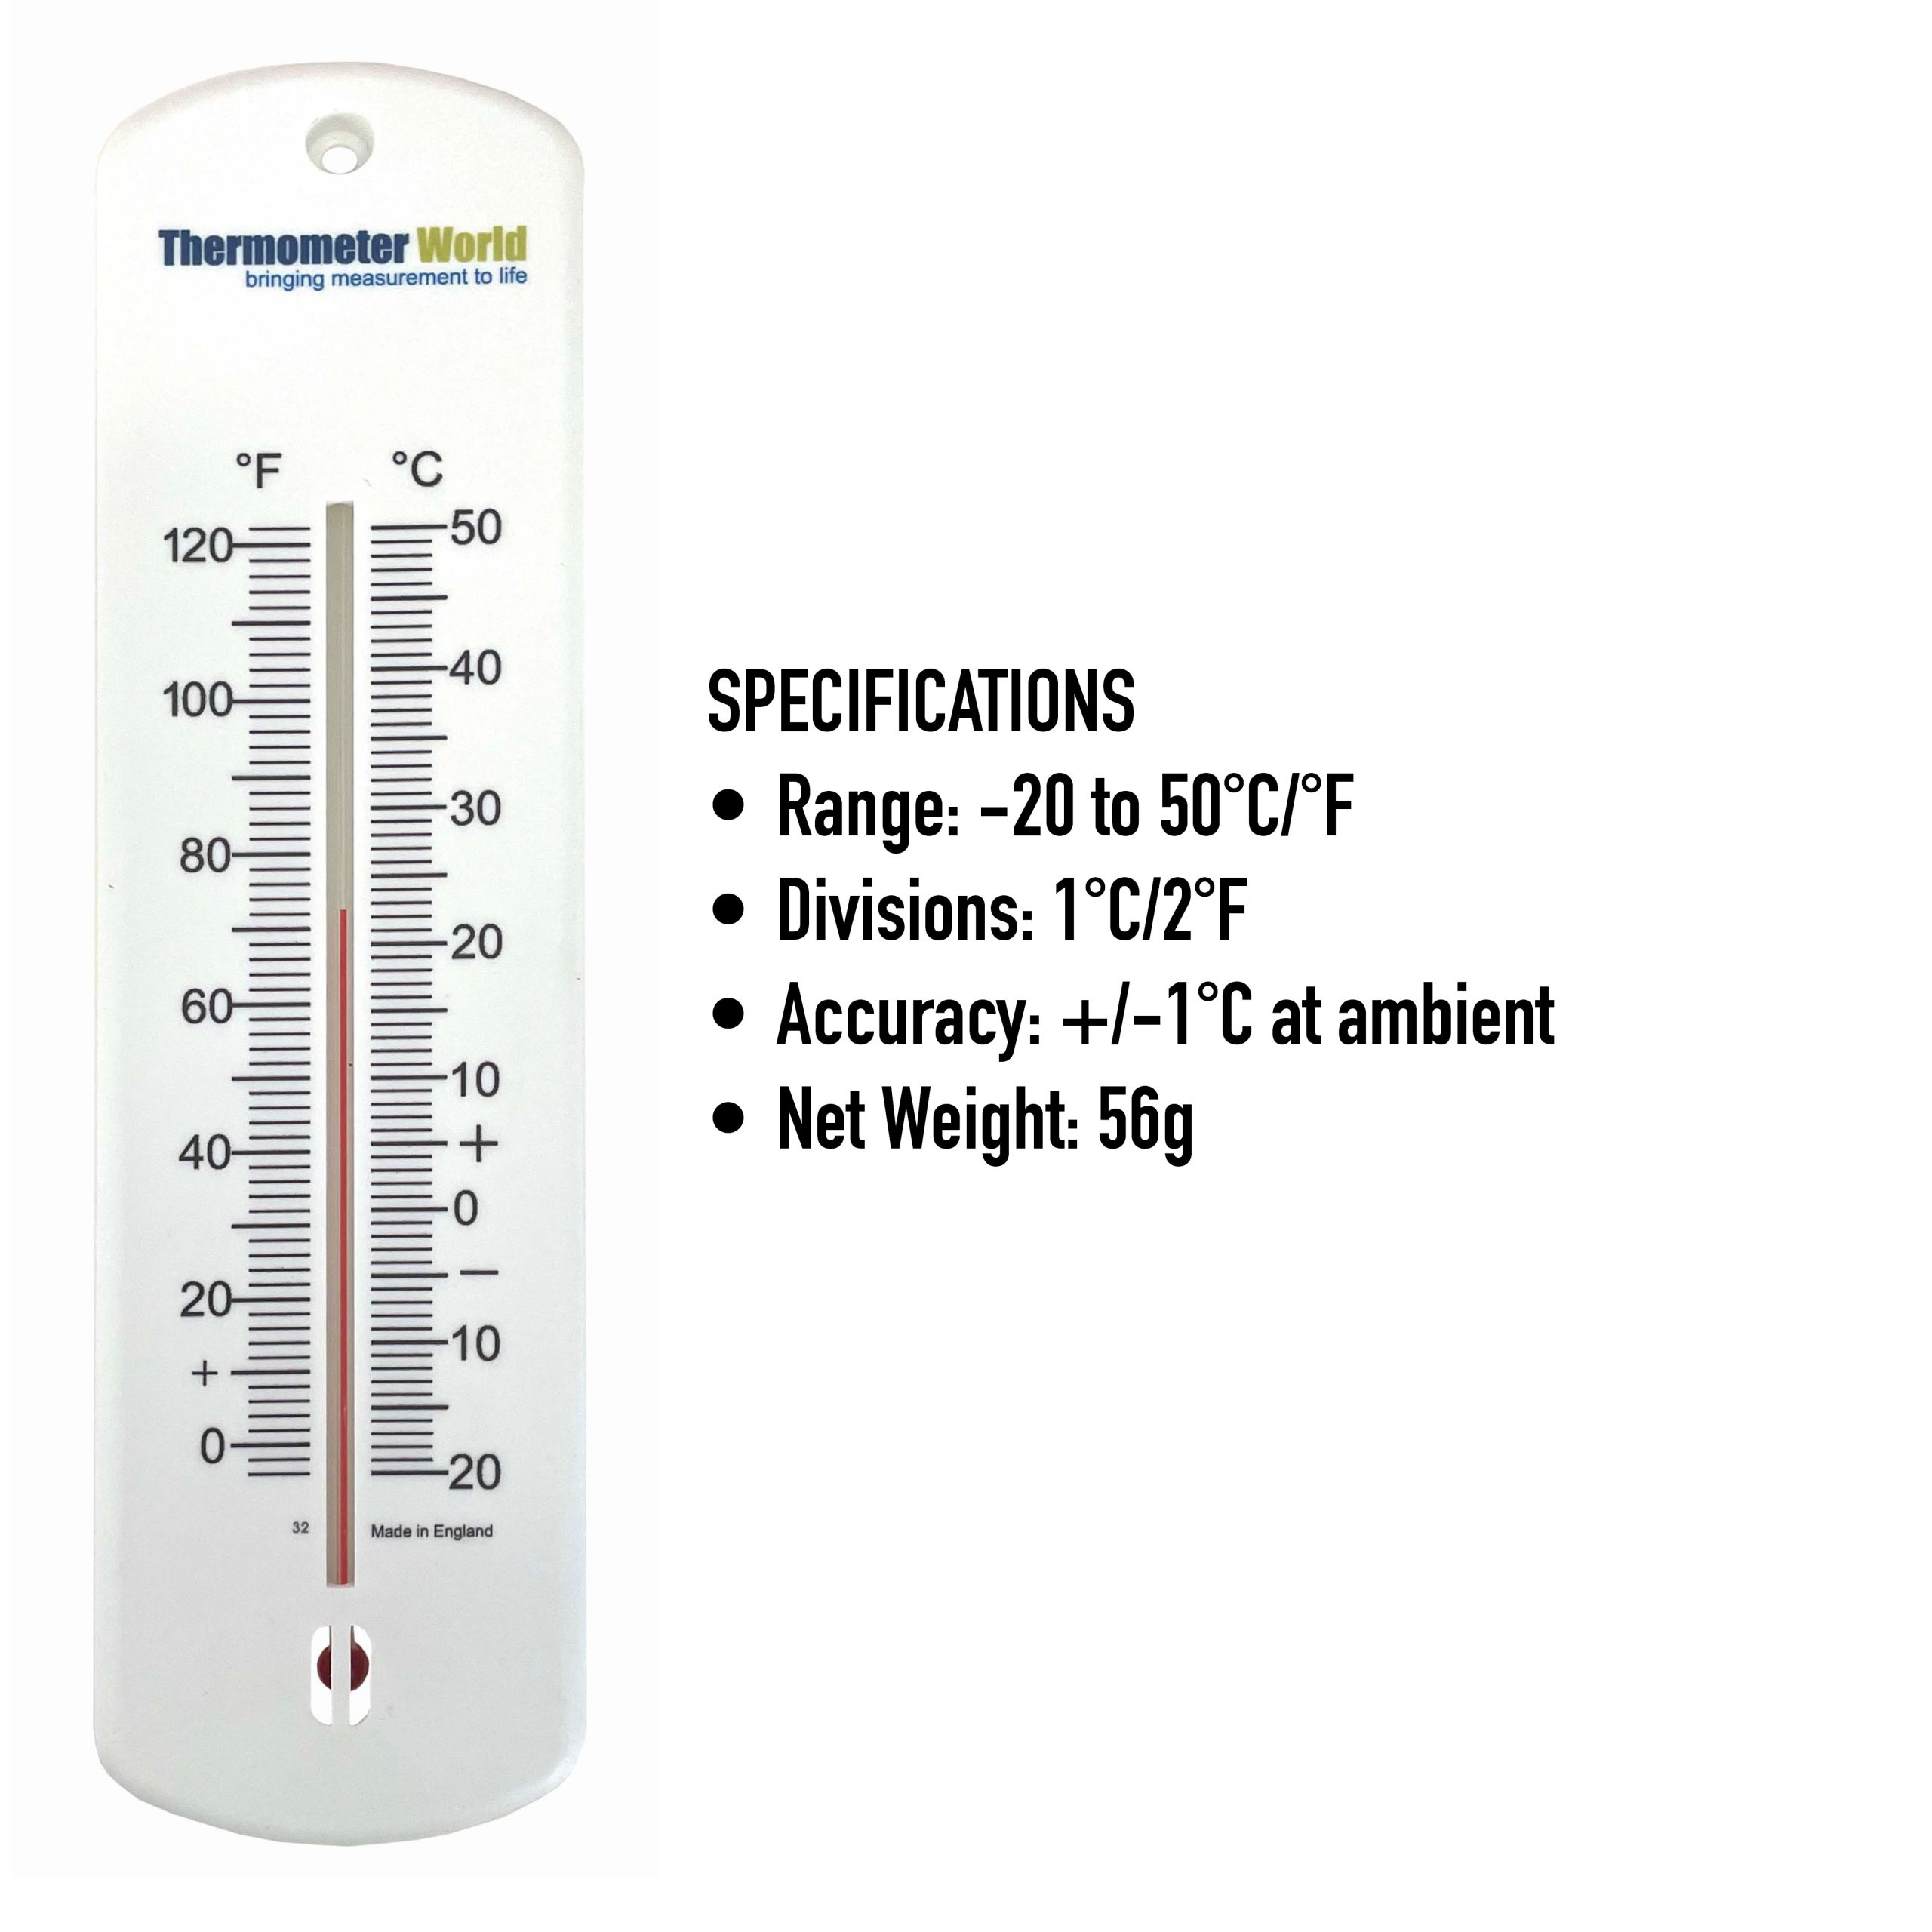 240mm Wall Thermometer for the home, office, garden or greenhouse